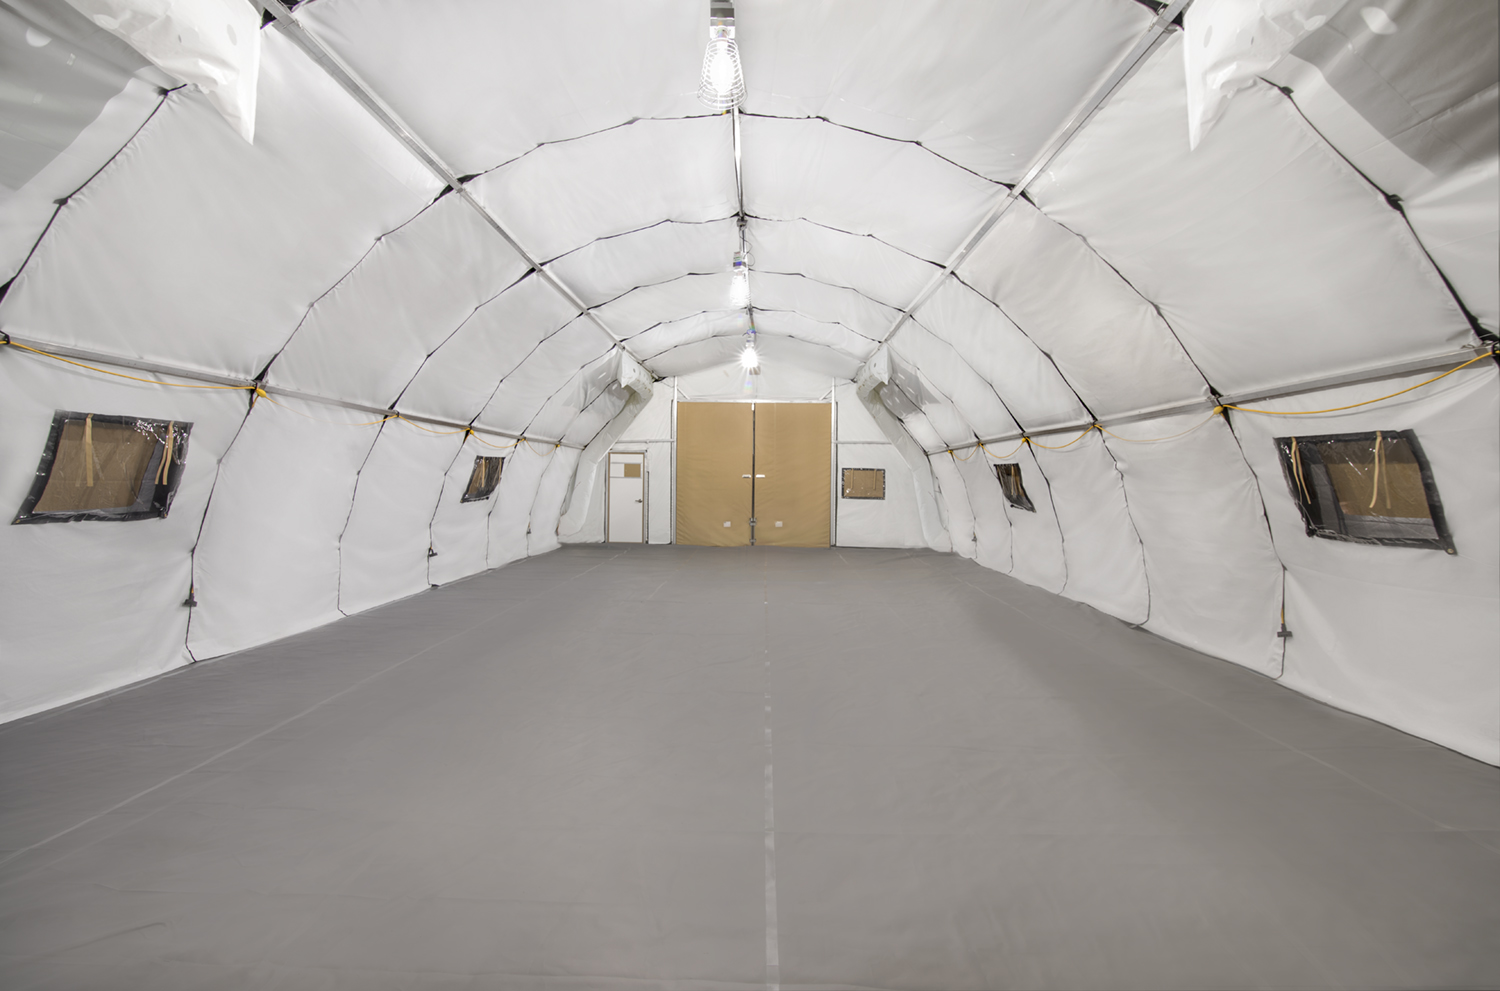 CAMSS30 Military Shelter with Metal Halide Lights and Standard Floor